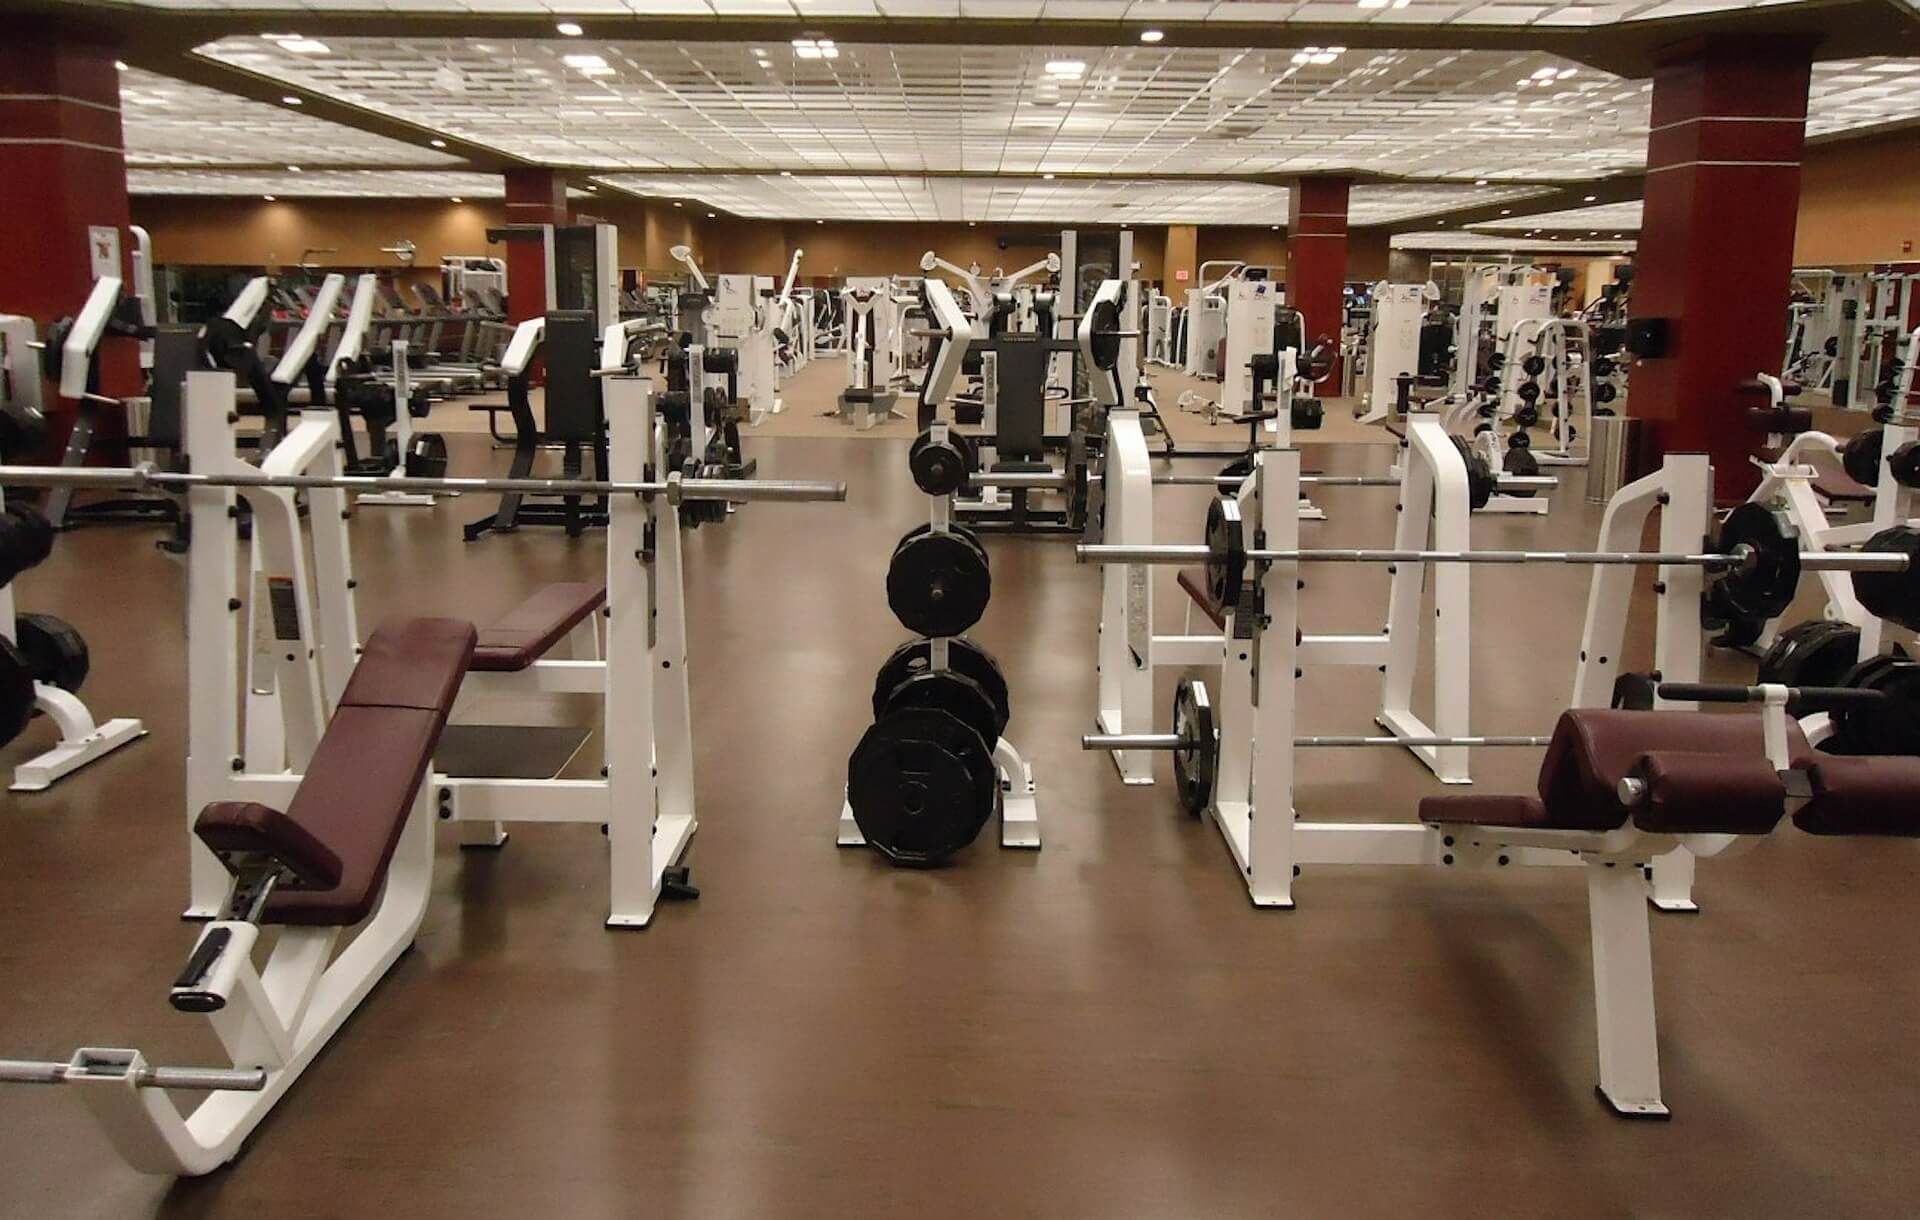 Most Important Tips and Factors to Consider When Choosing Gym Equipment and Exercise Machines